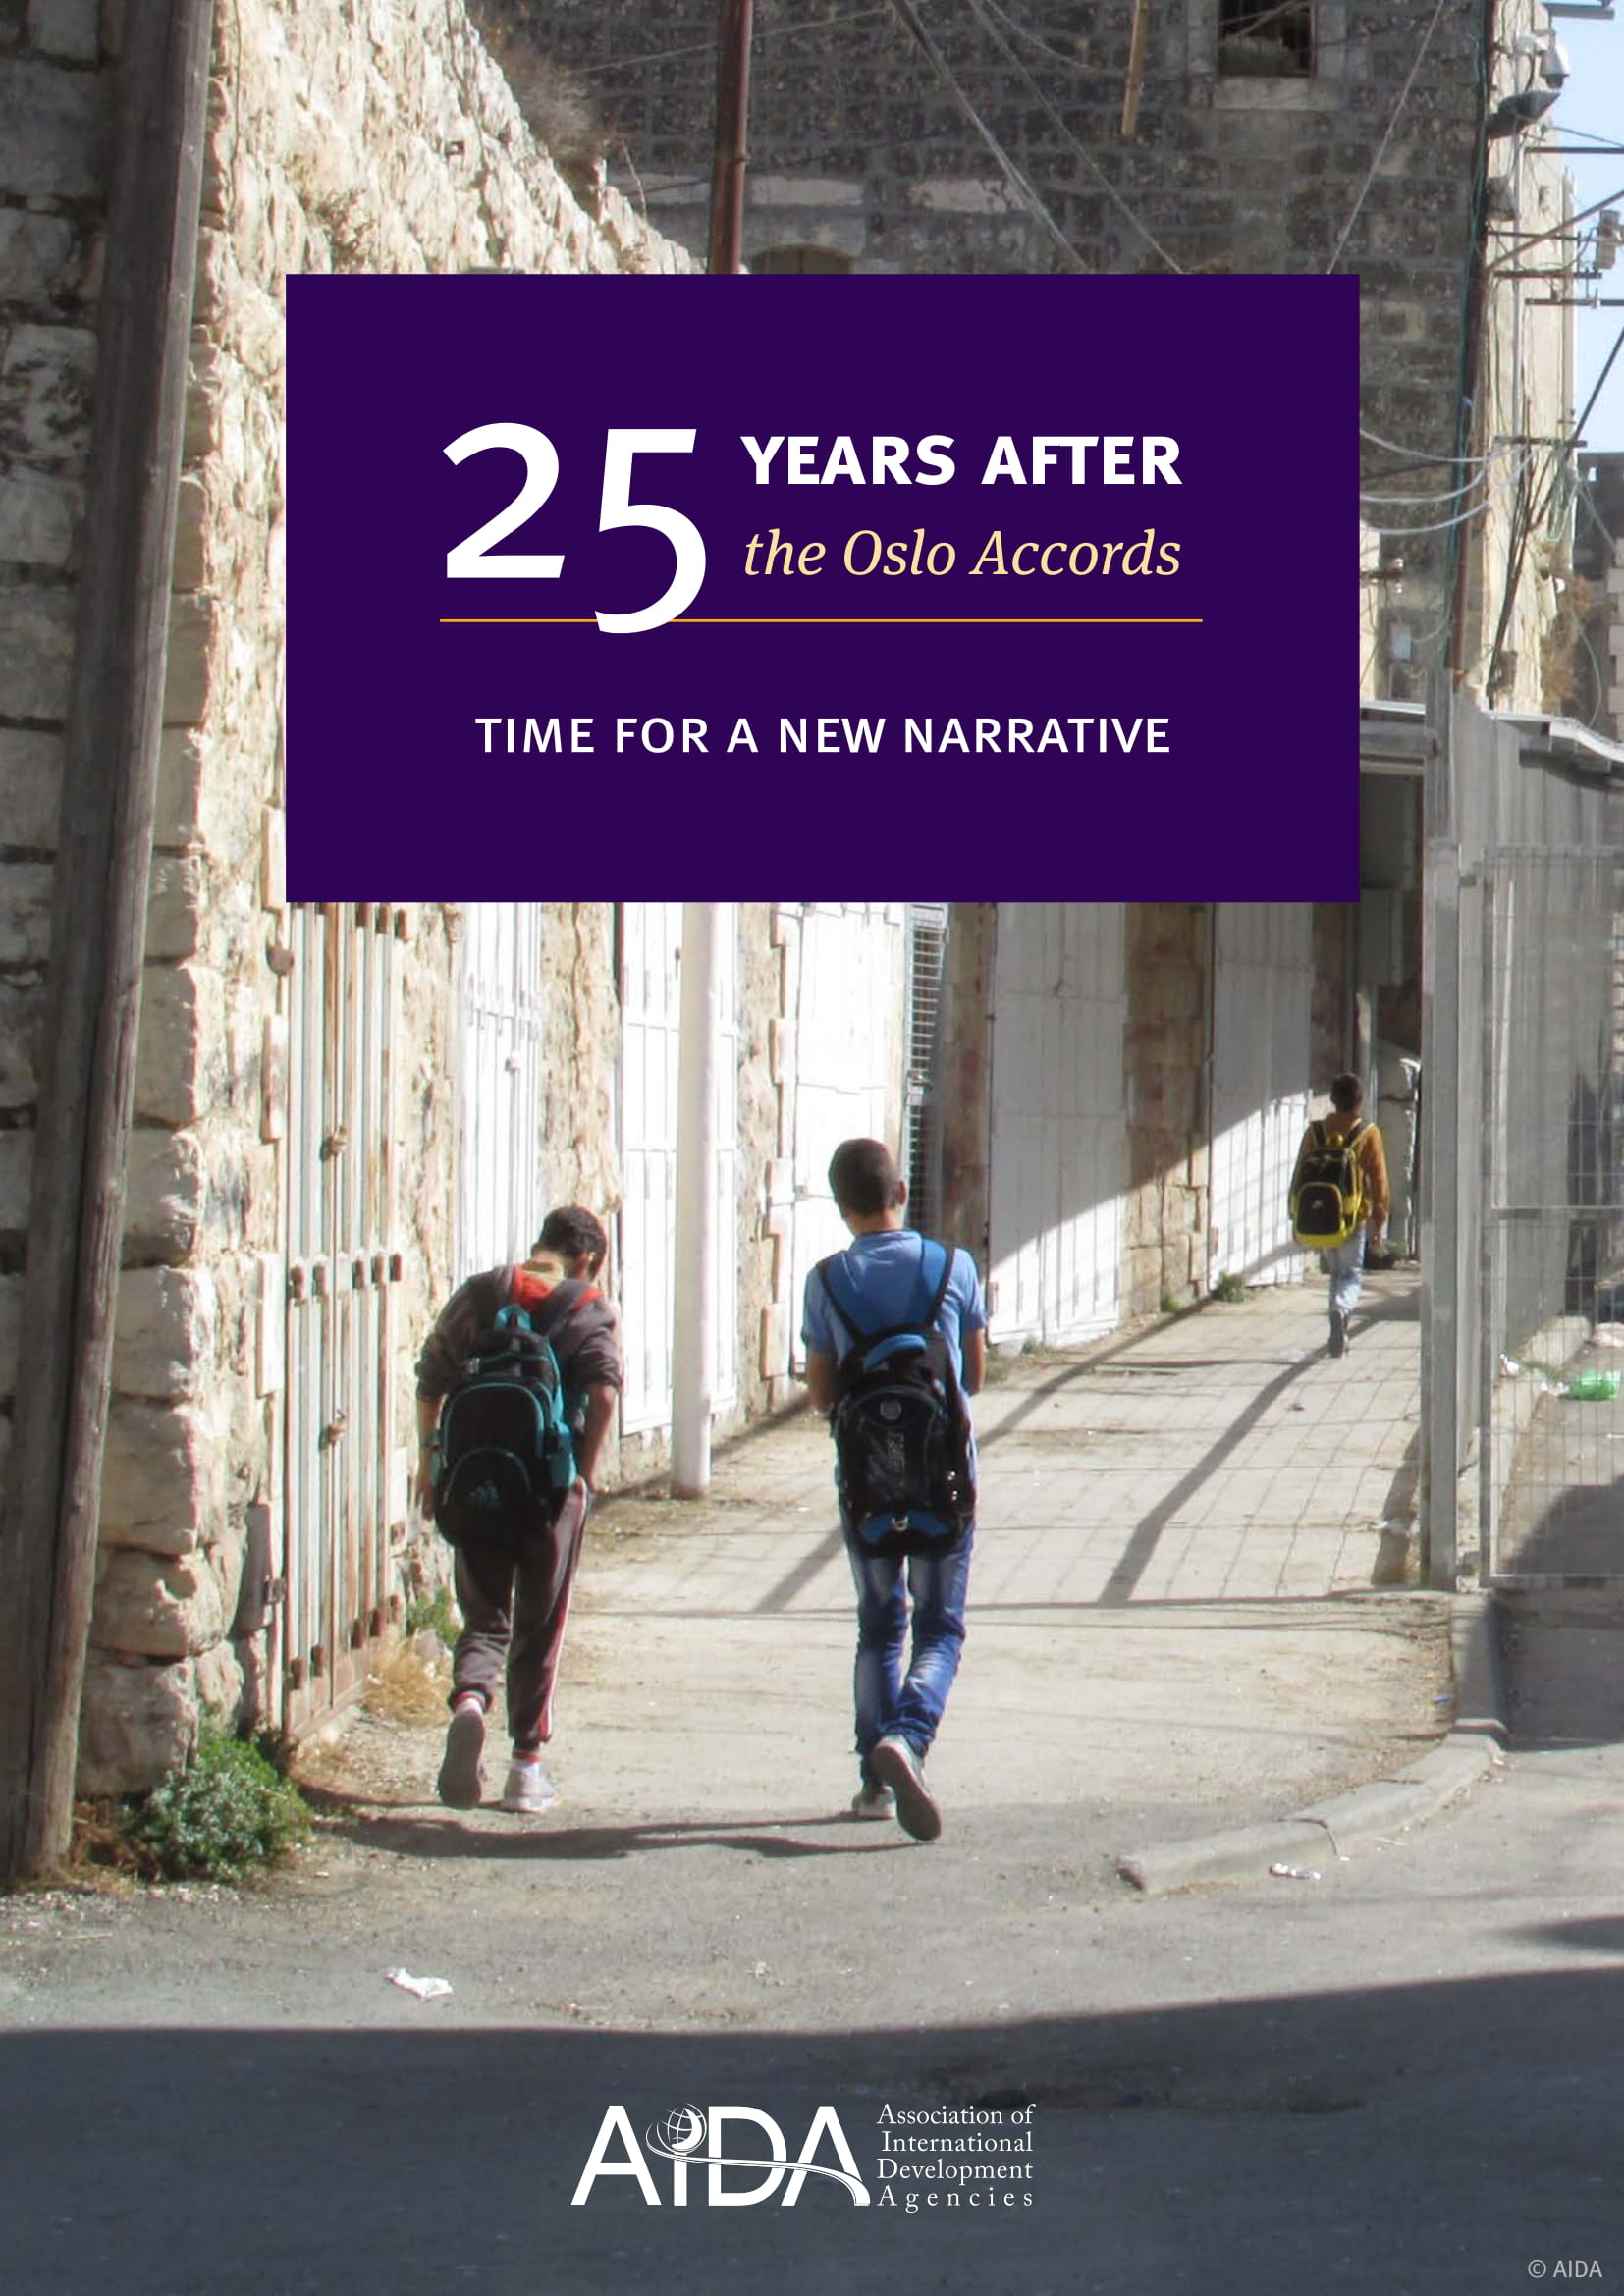 Time for a new narrative: 25 years after the Oslo Accords